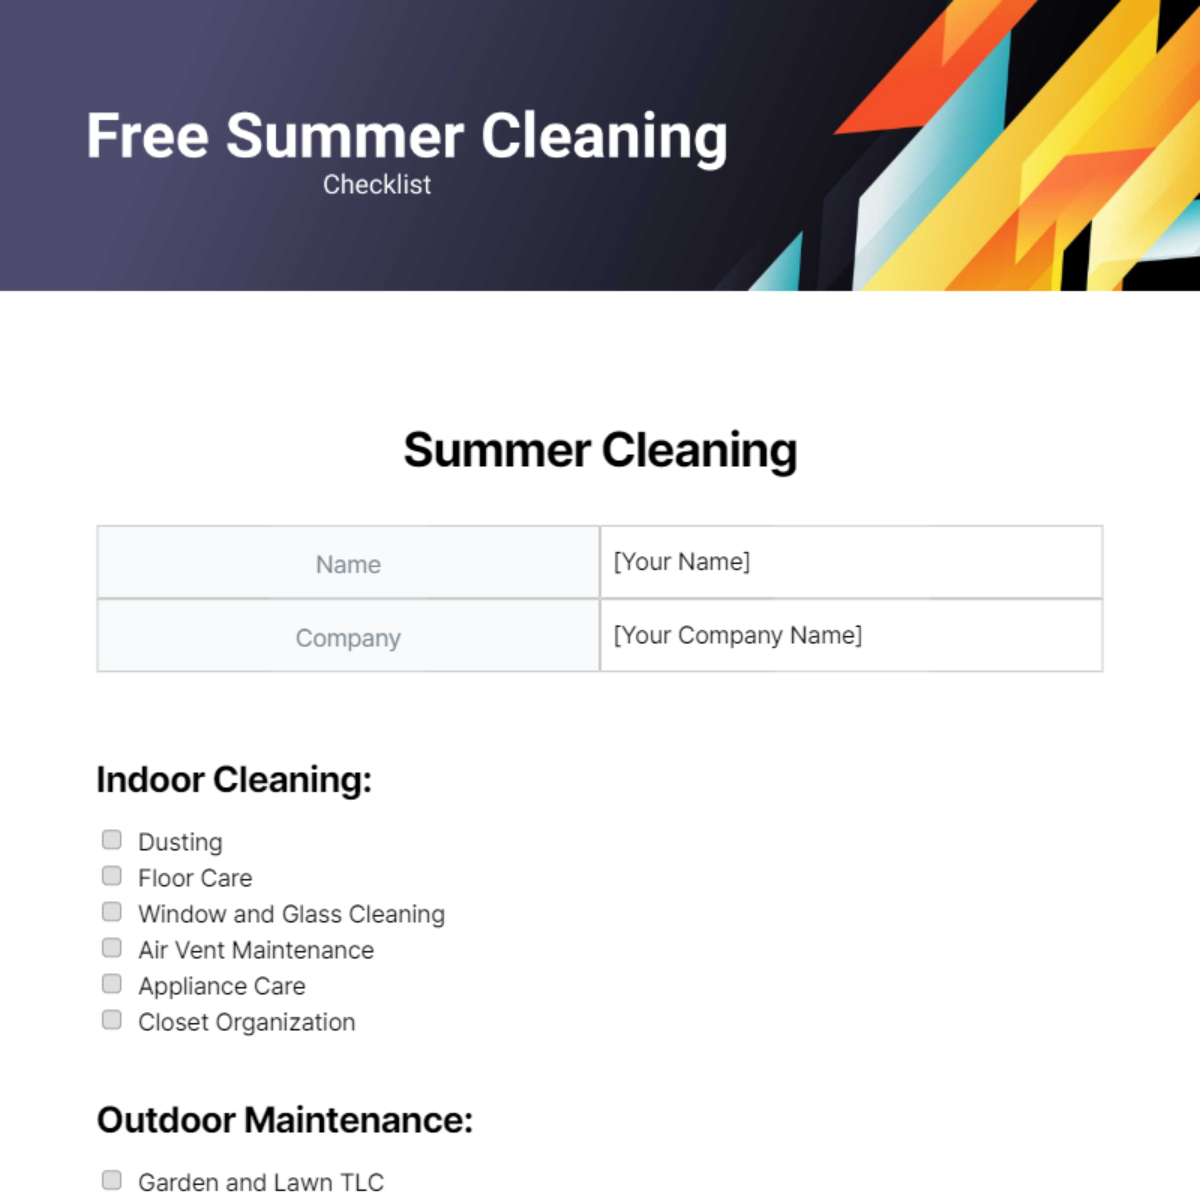 Summer Cleaning Checklist Template